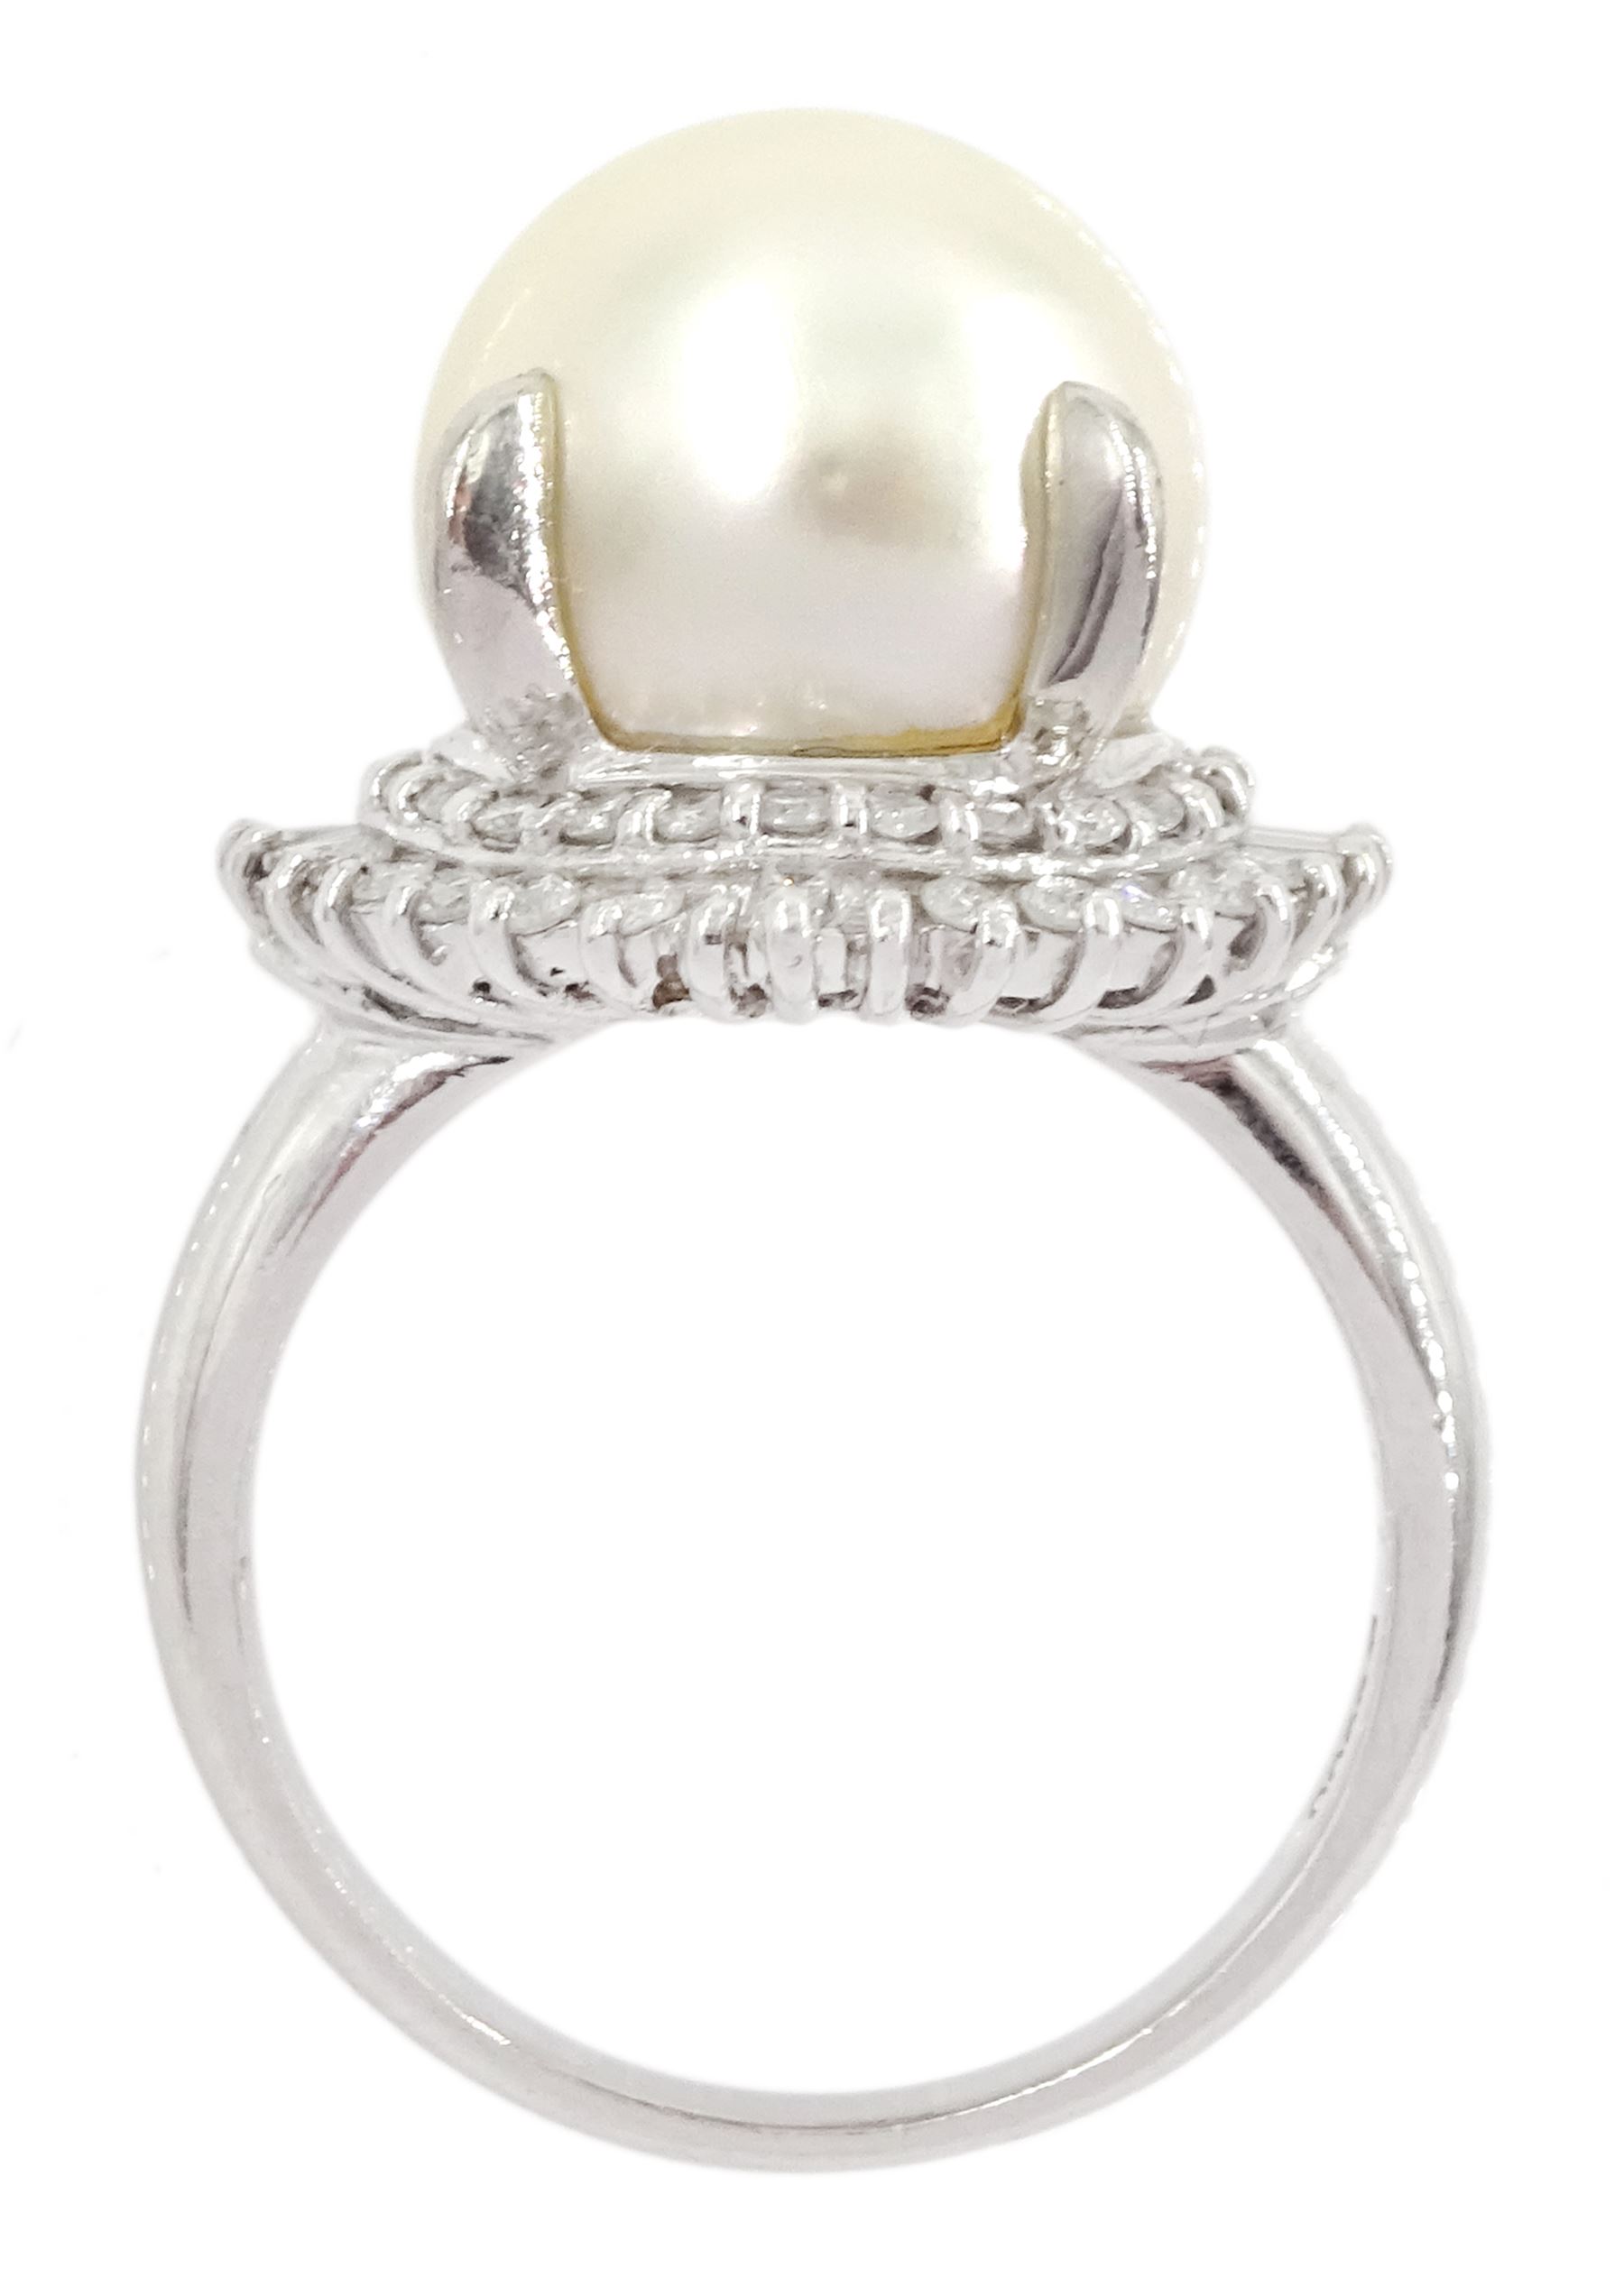 Platinum single stone cultured pearl and diamond cluster ring - Image 4 of 4